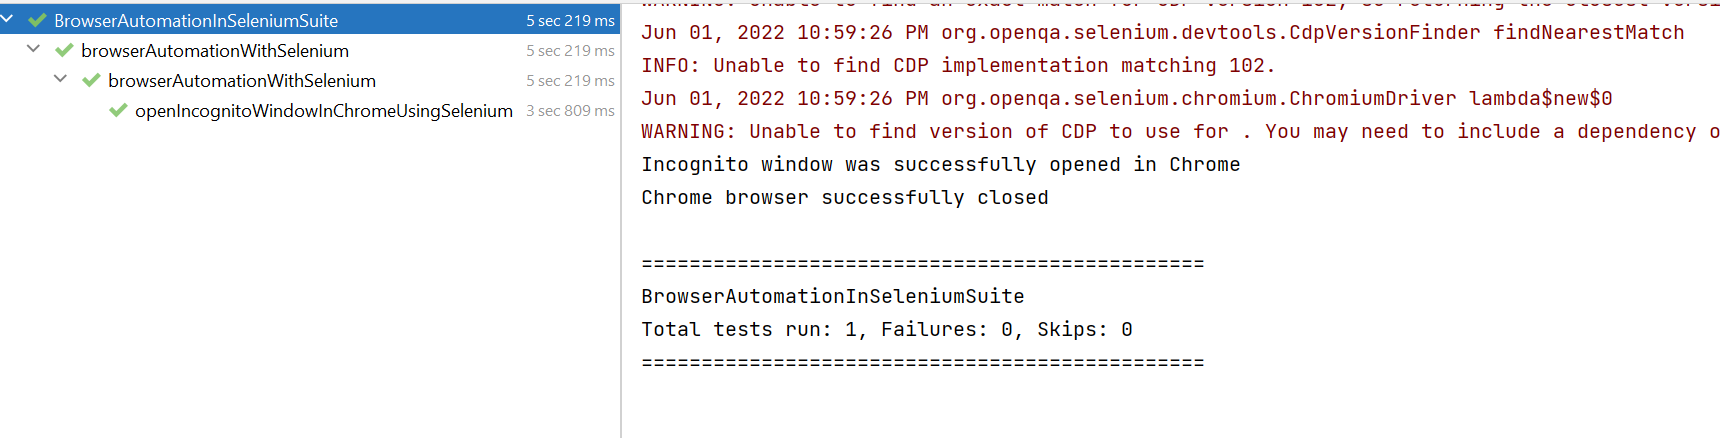 Test Result of Browser Automation to launch browser in Incognito Mode